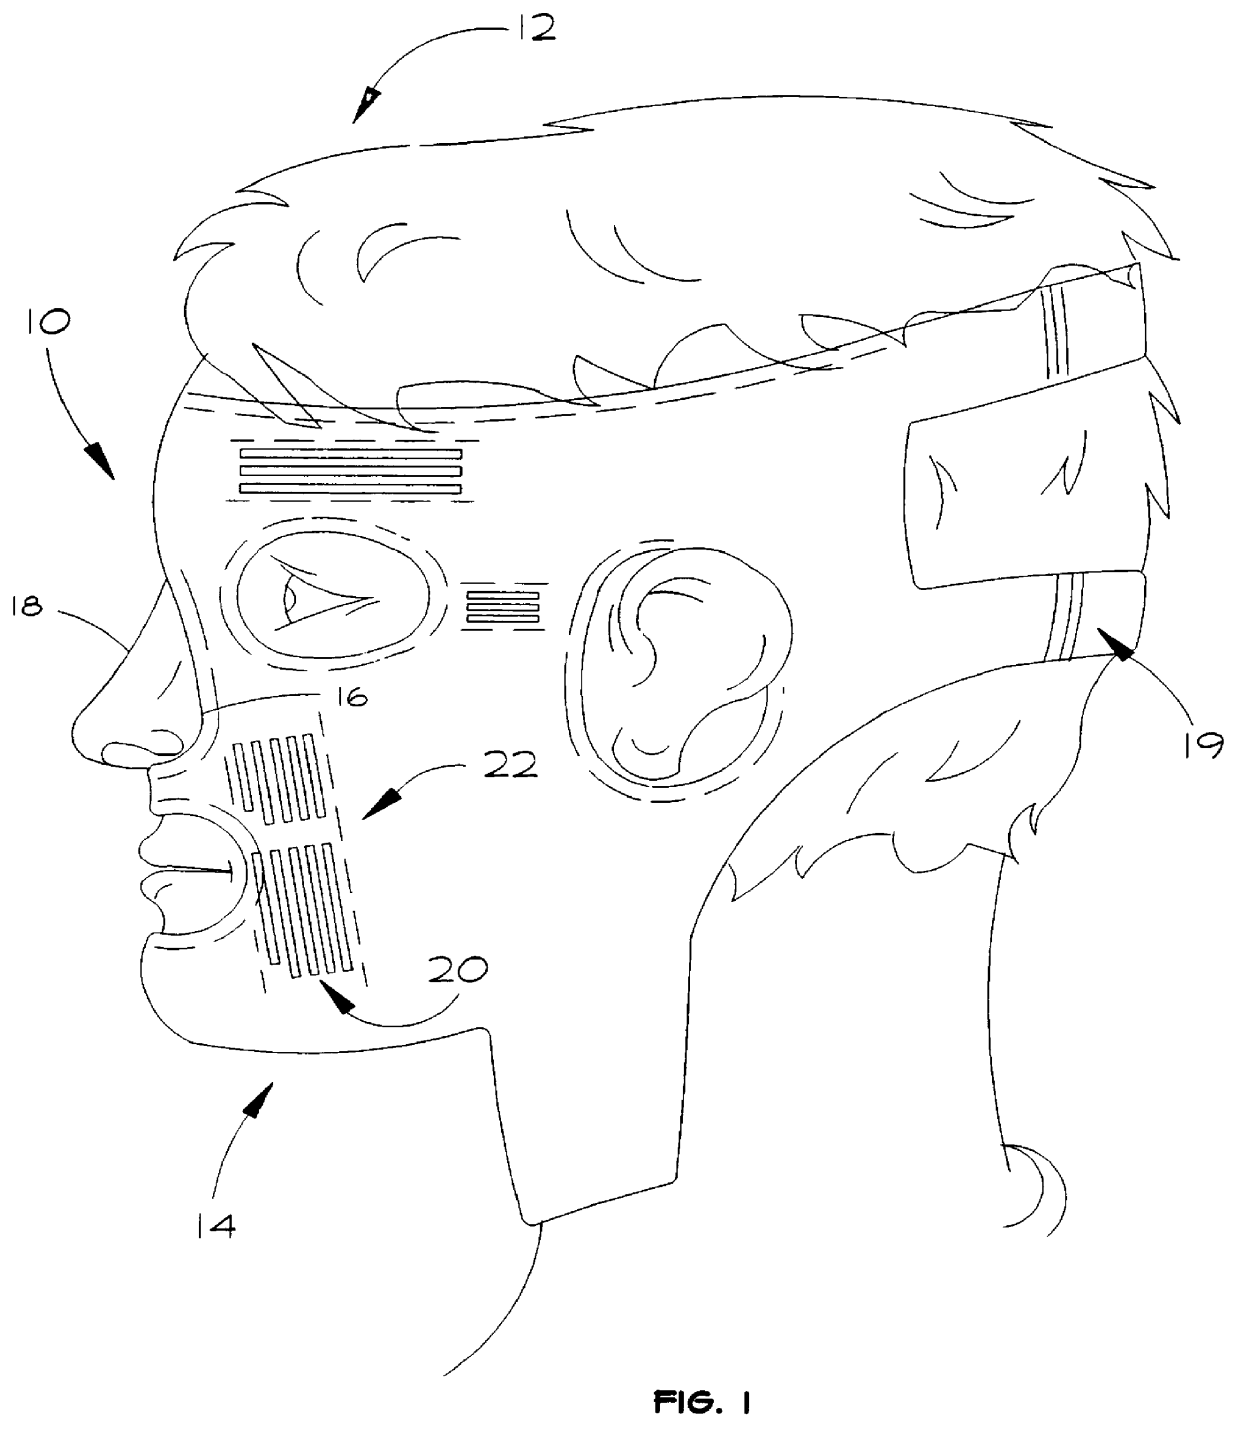 Cosmetic and therapeutic mask assembly with accessible and positionable magnetic pocket means